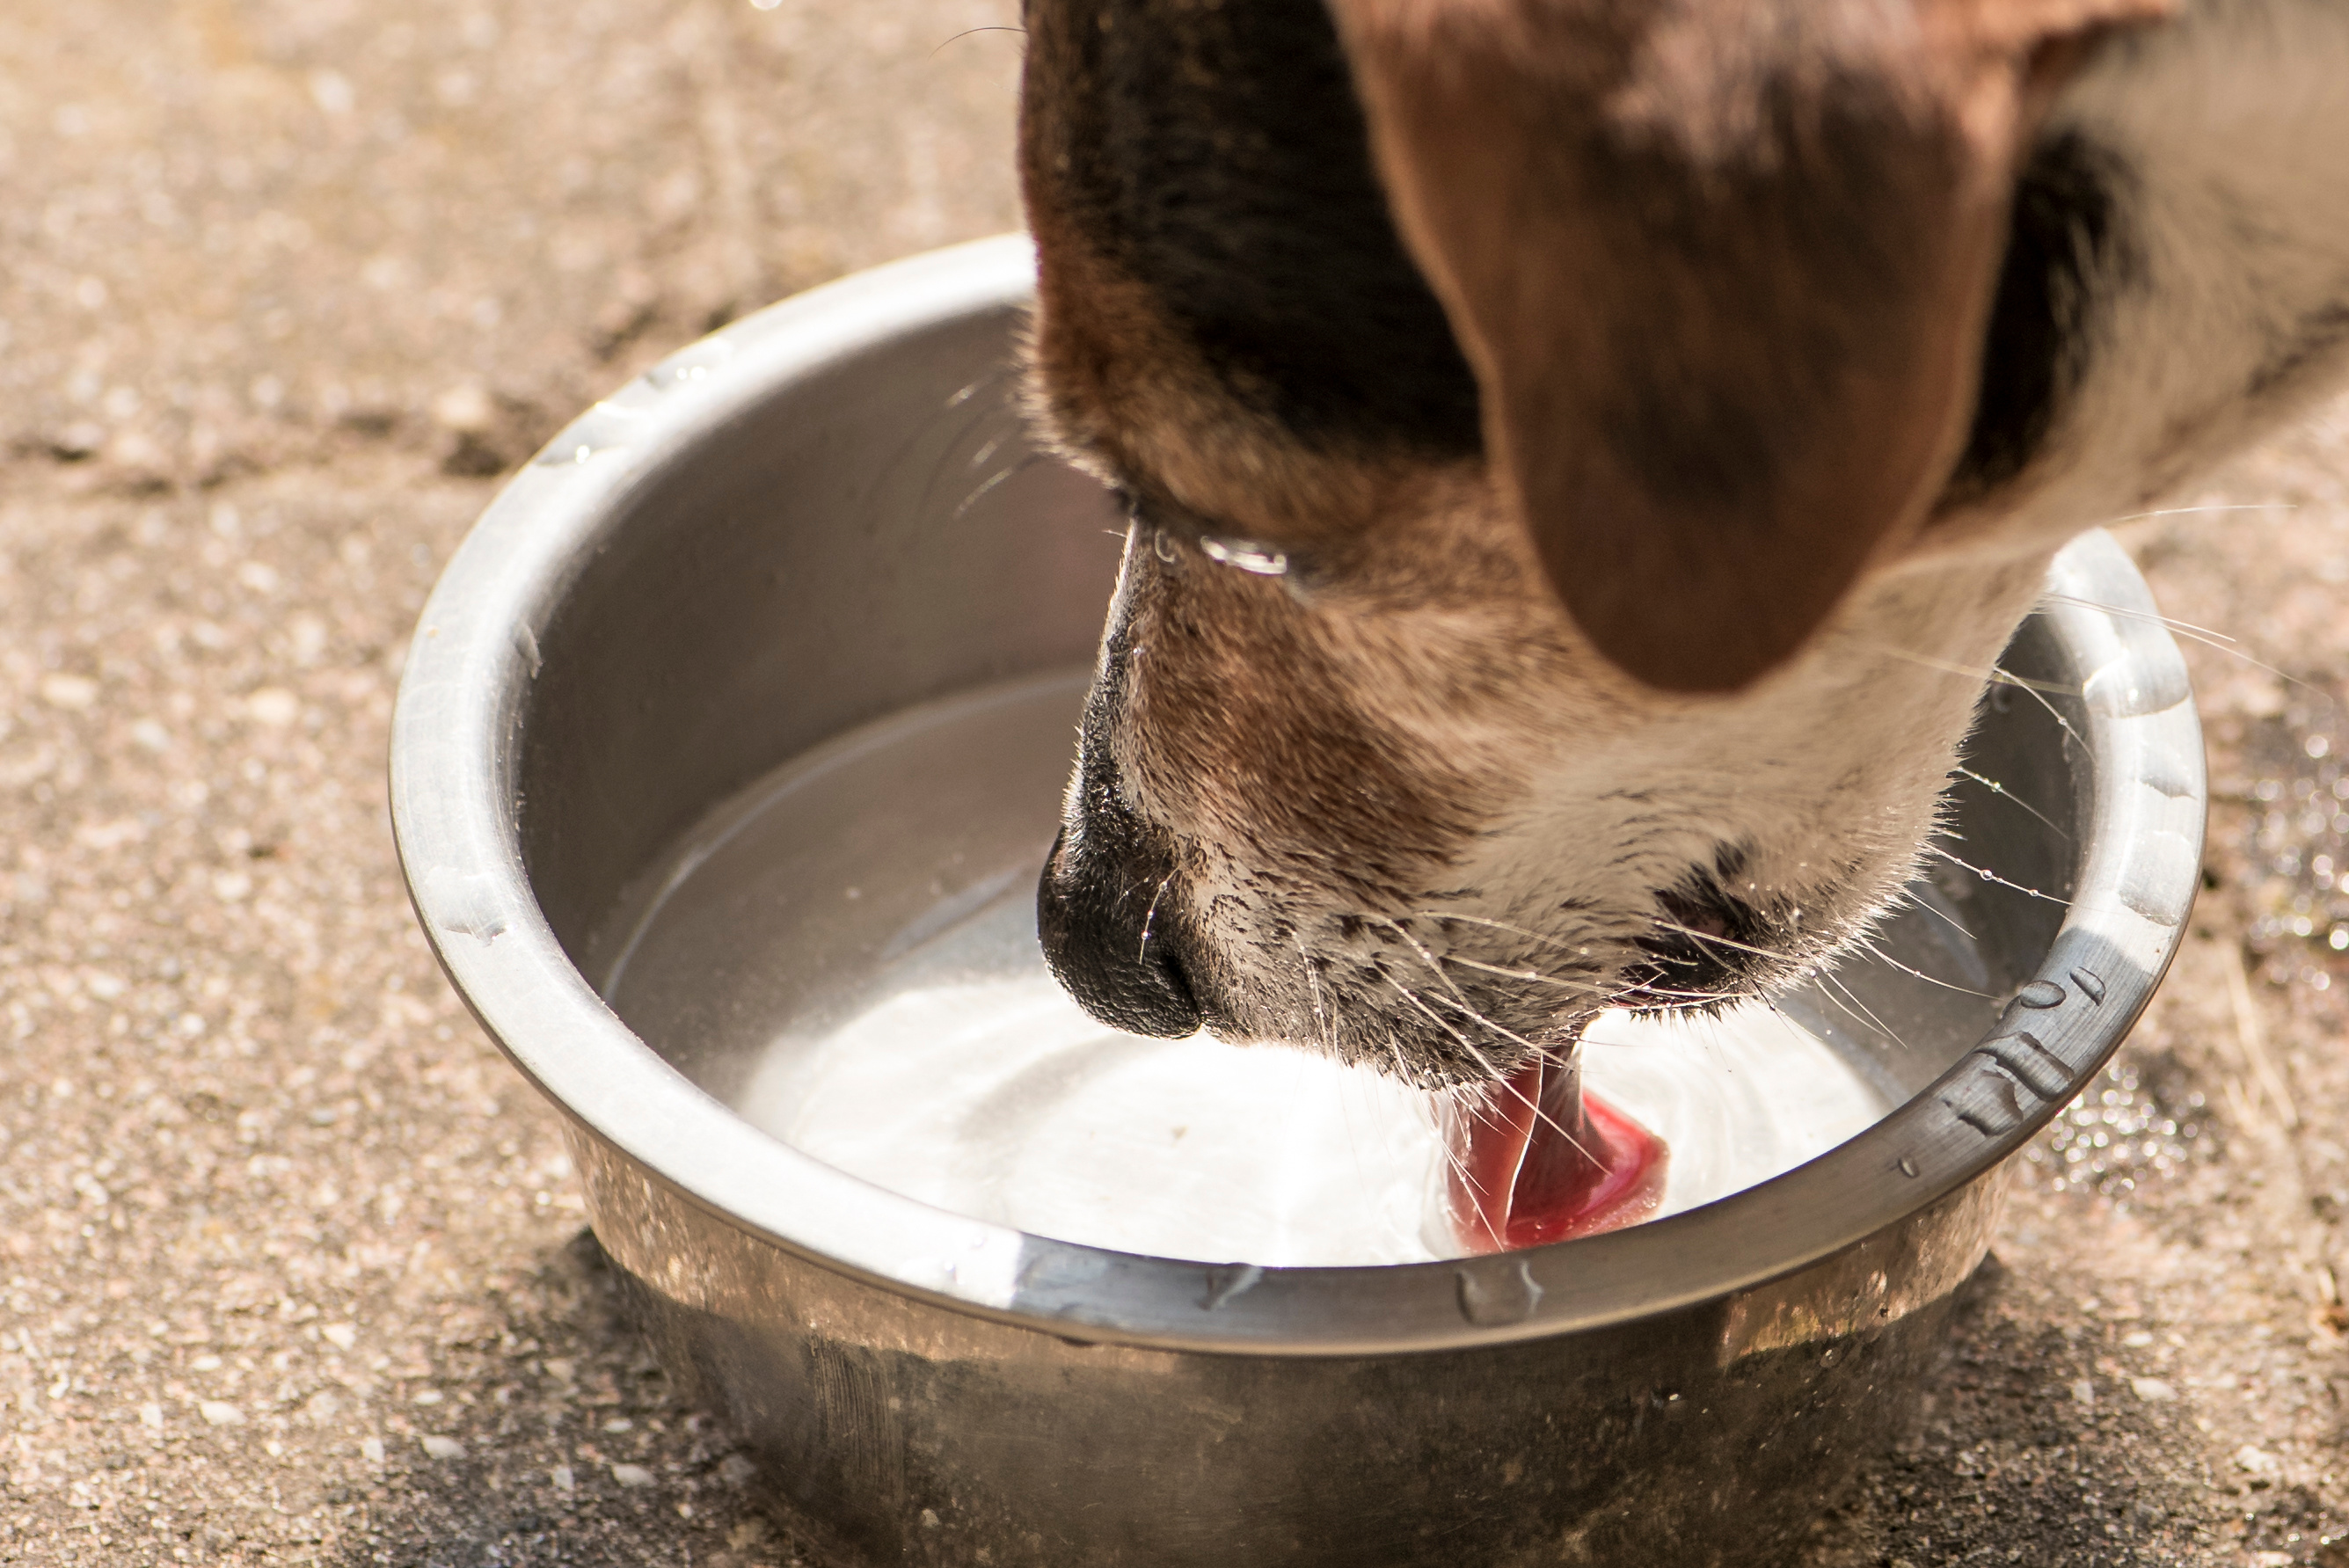 Dog drinks water, illustrates the importance of monitoring drinking habits for kidney problems.